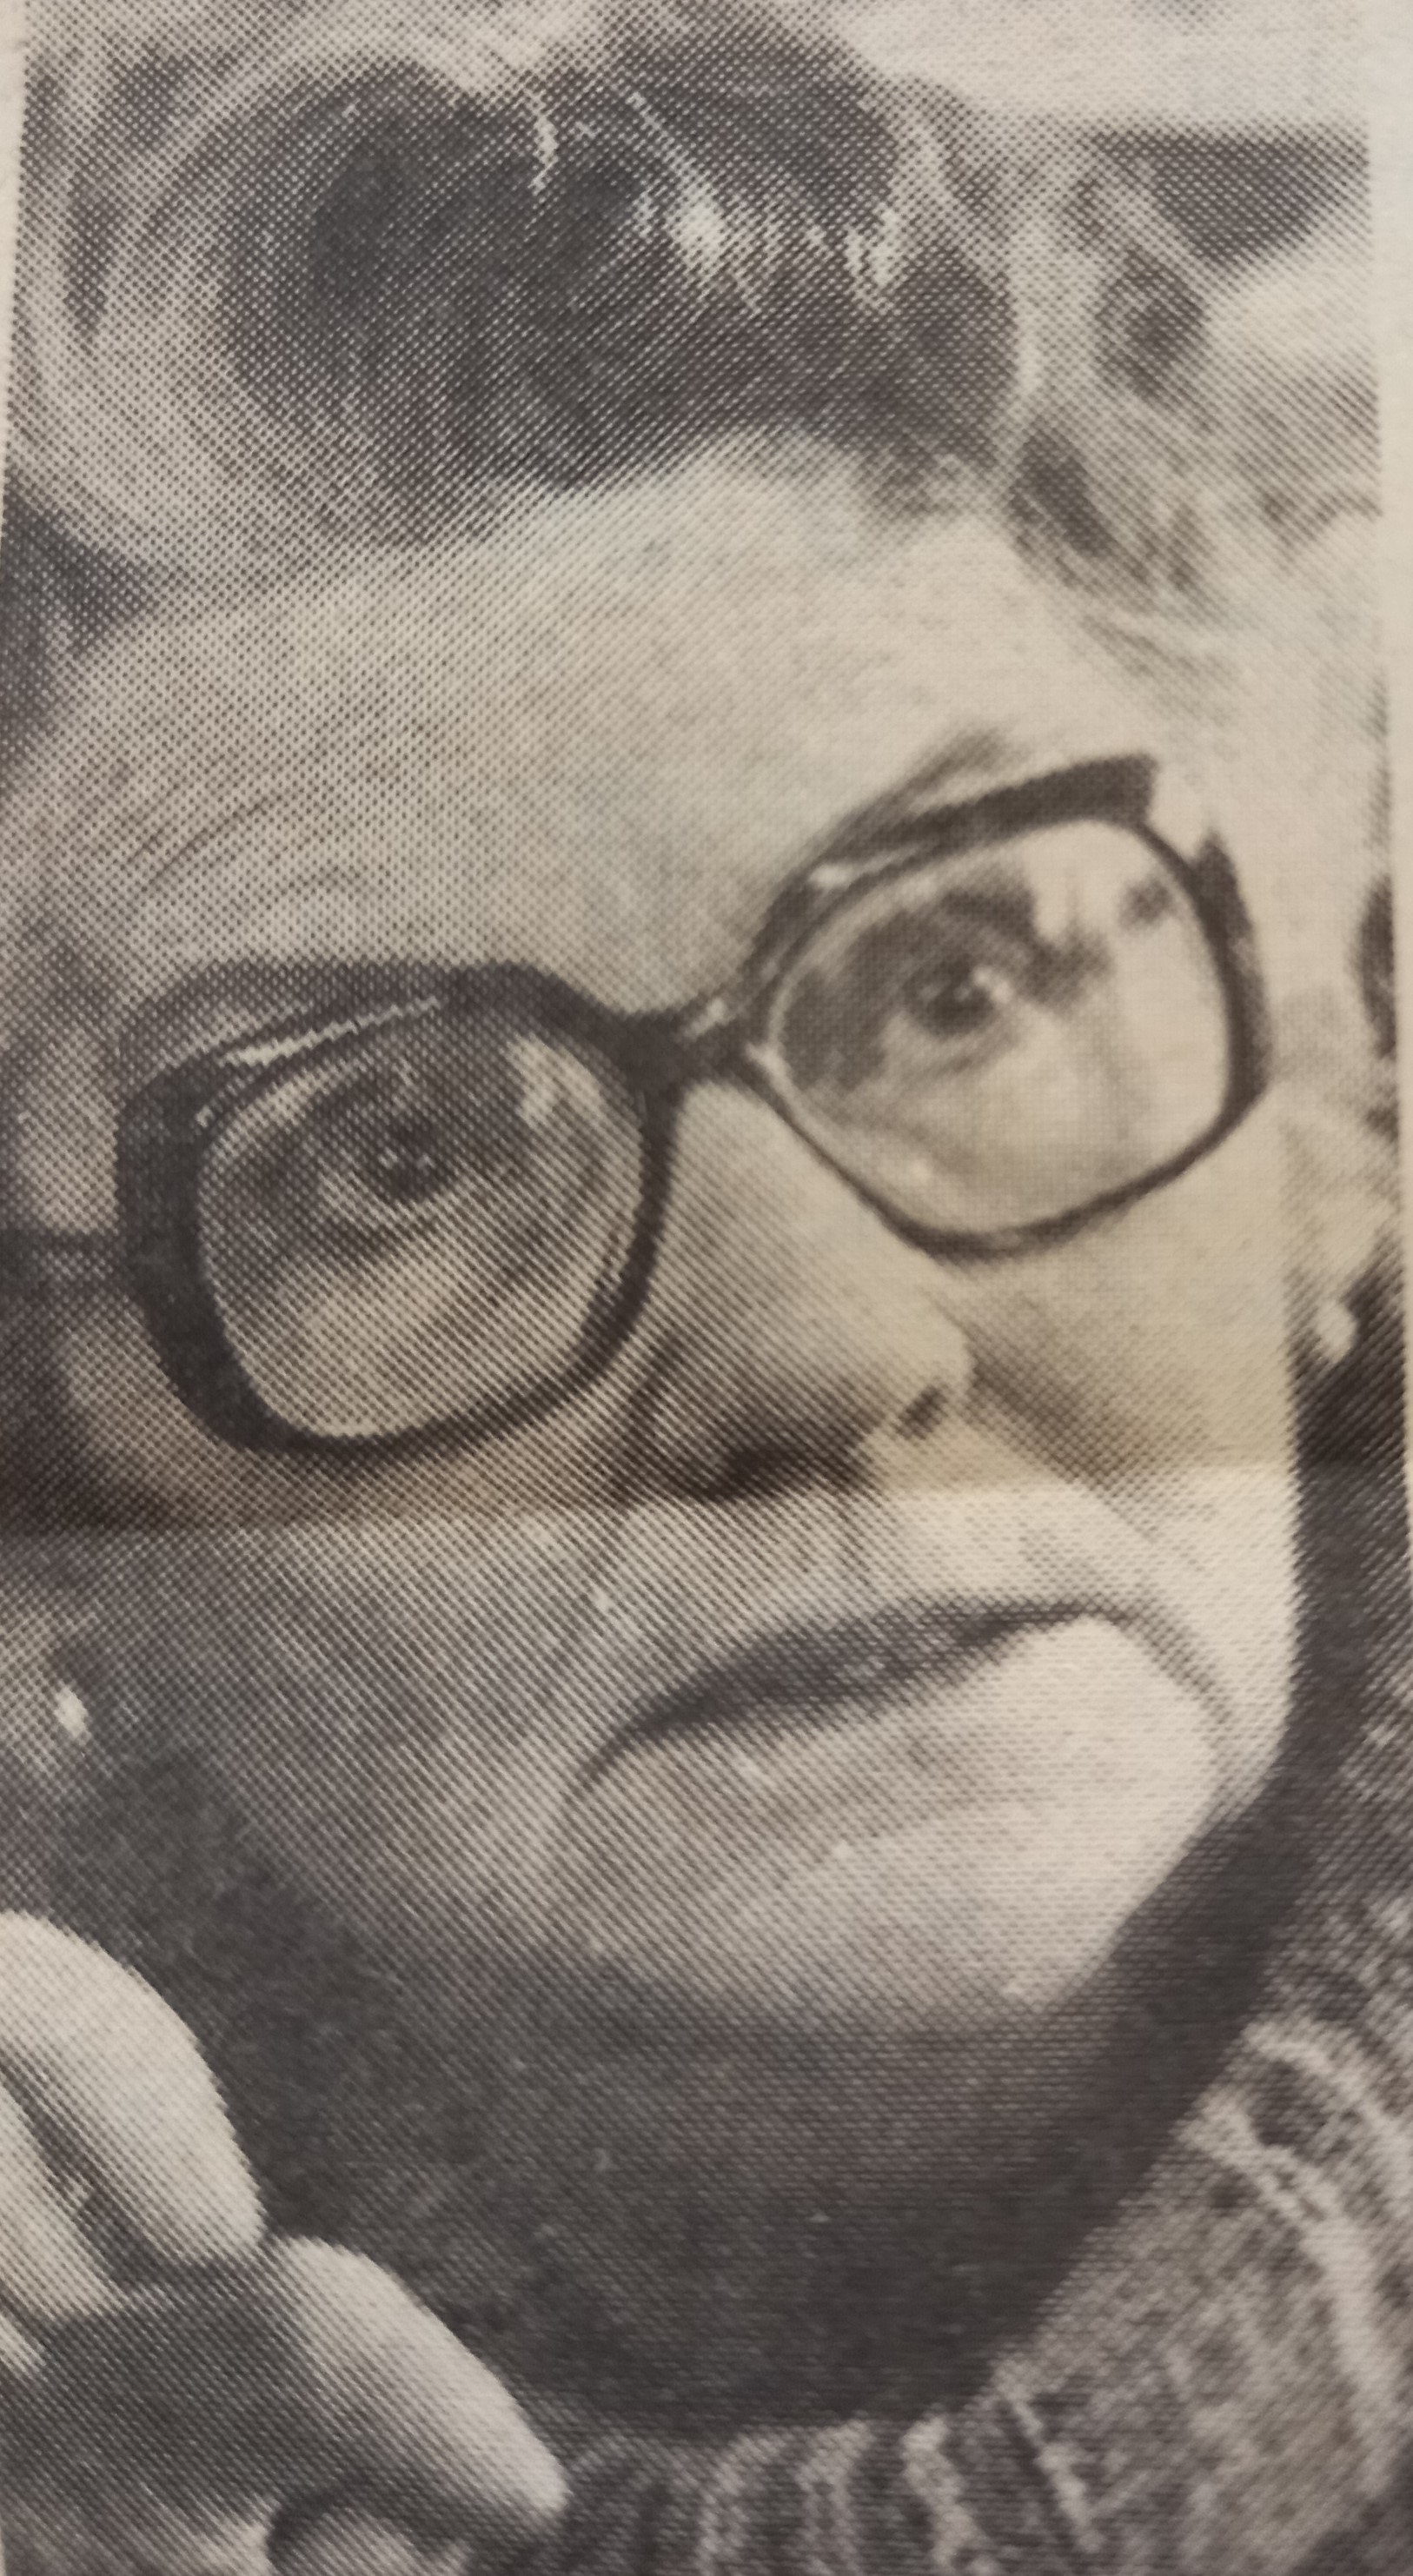 Campaigner Mary Whitehouse